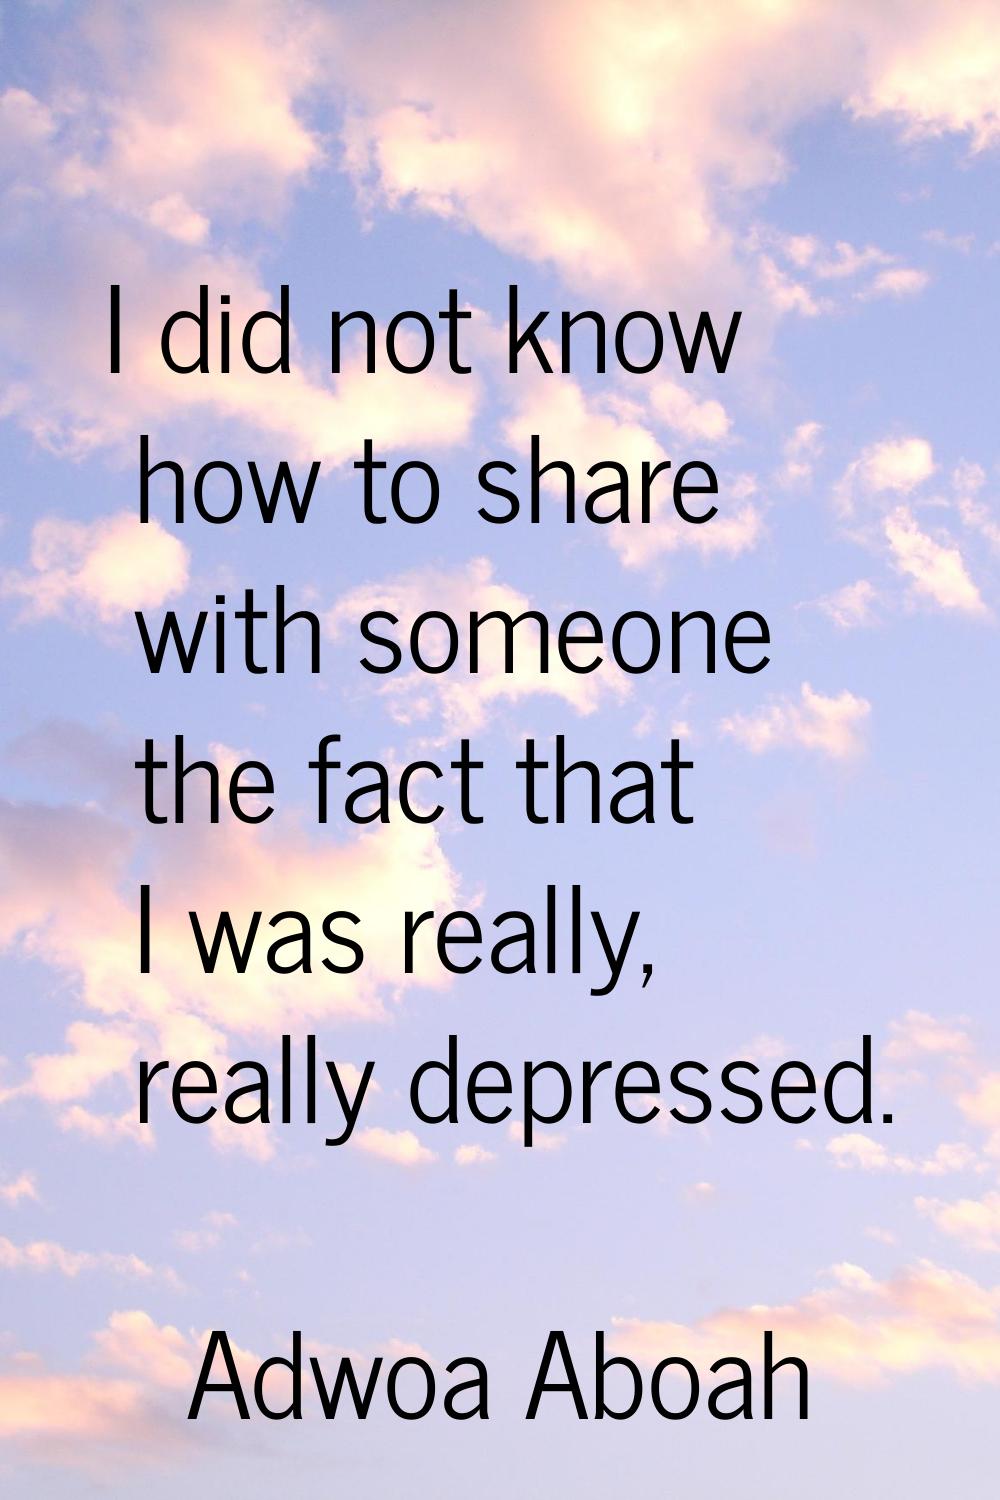 I did not know how to share with someone the fact that I was really, really depressed.